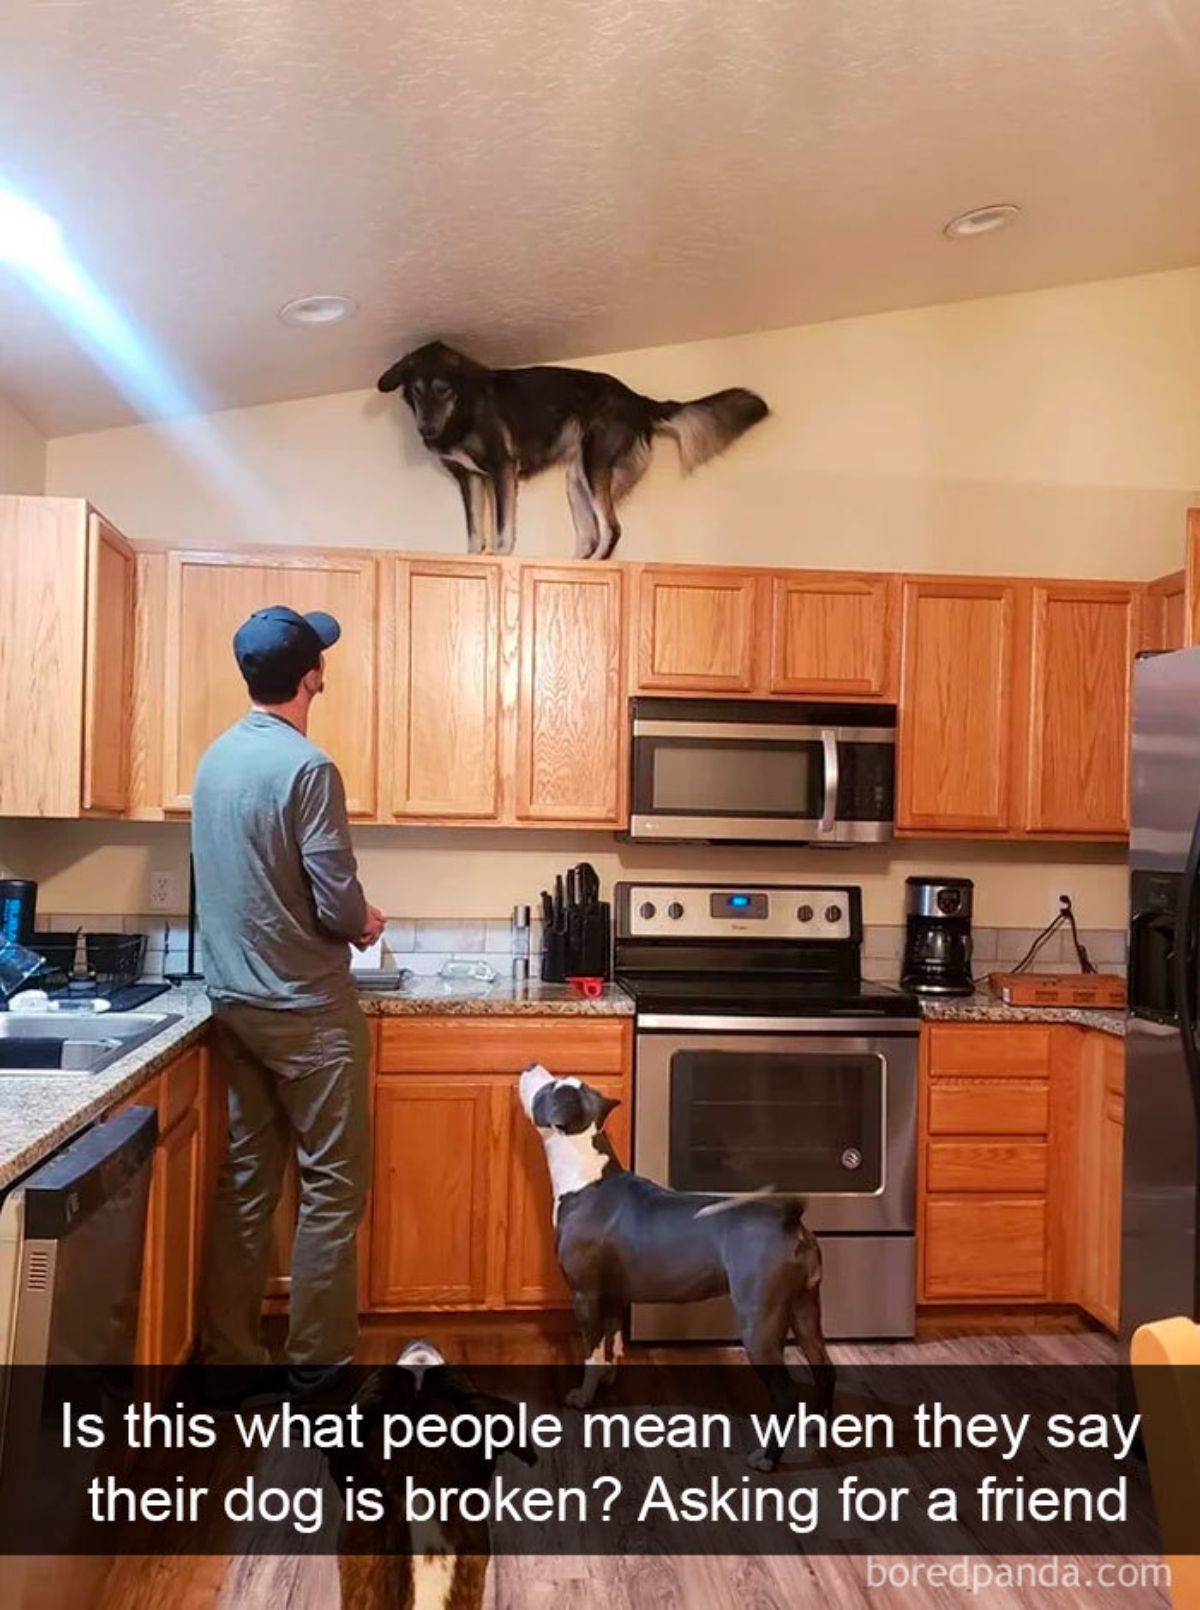 fluffy black and brown dog standing on top of a kitchen cabinet while a man, a black and white dog and another dog look up at it with a caption saying is this what people mean when they say their dog is broken? asking for a friend